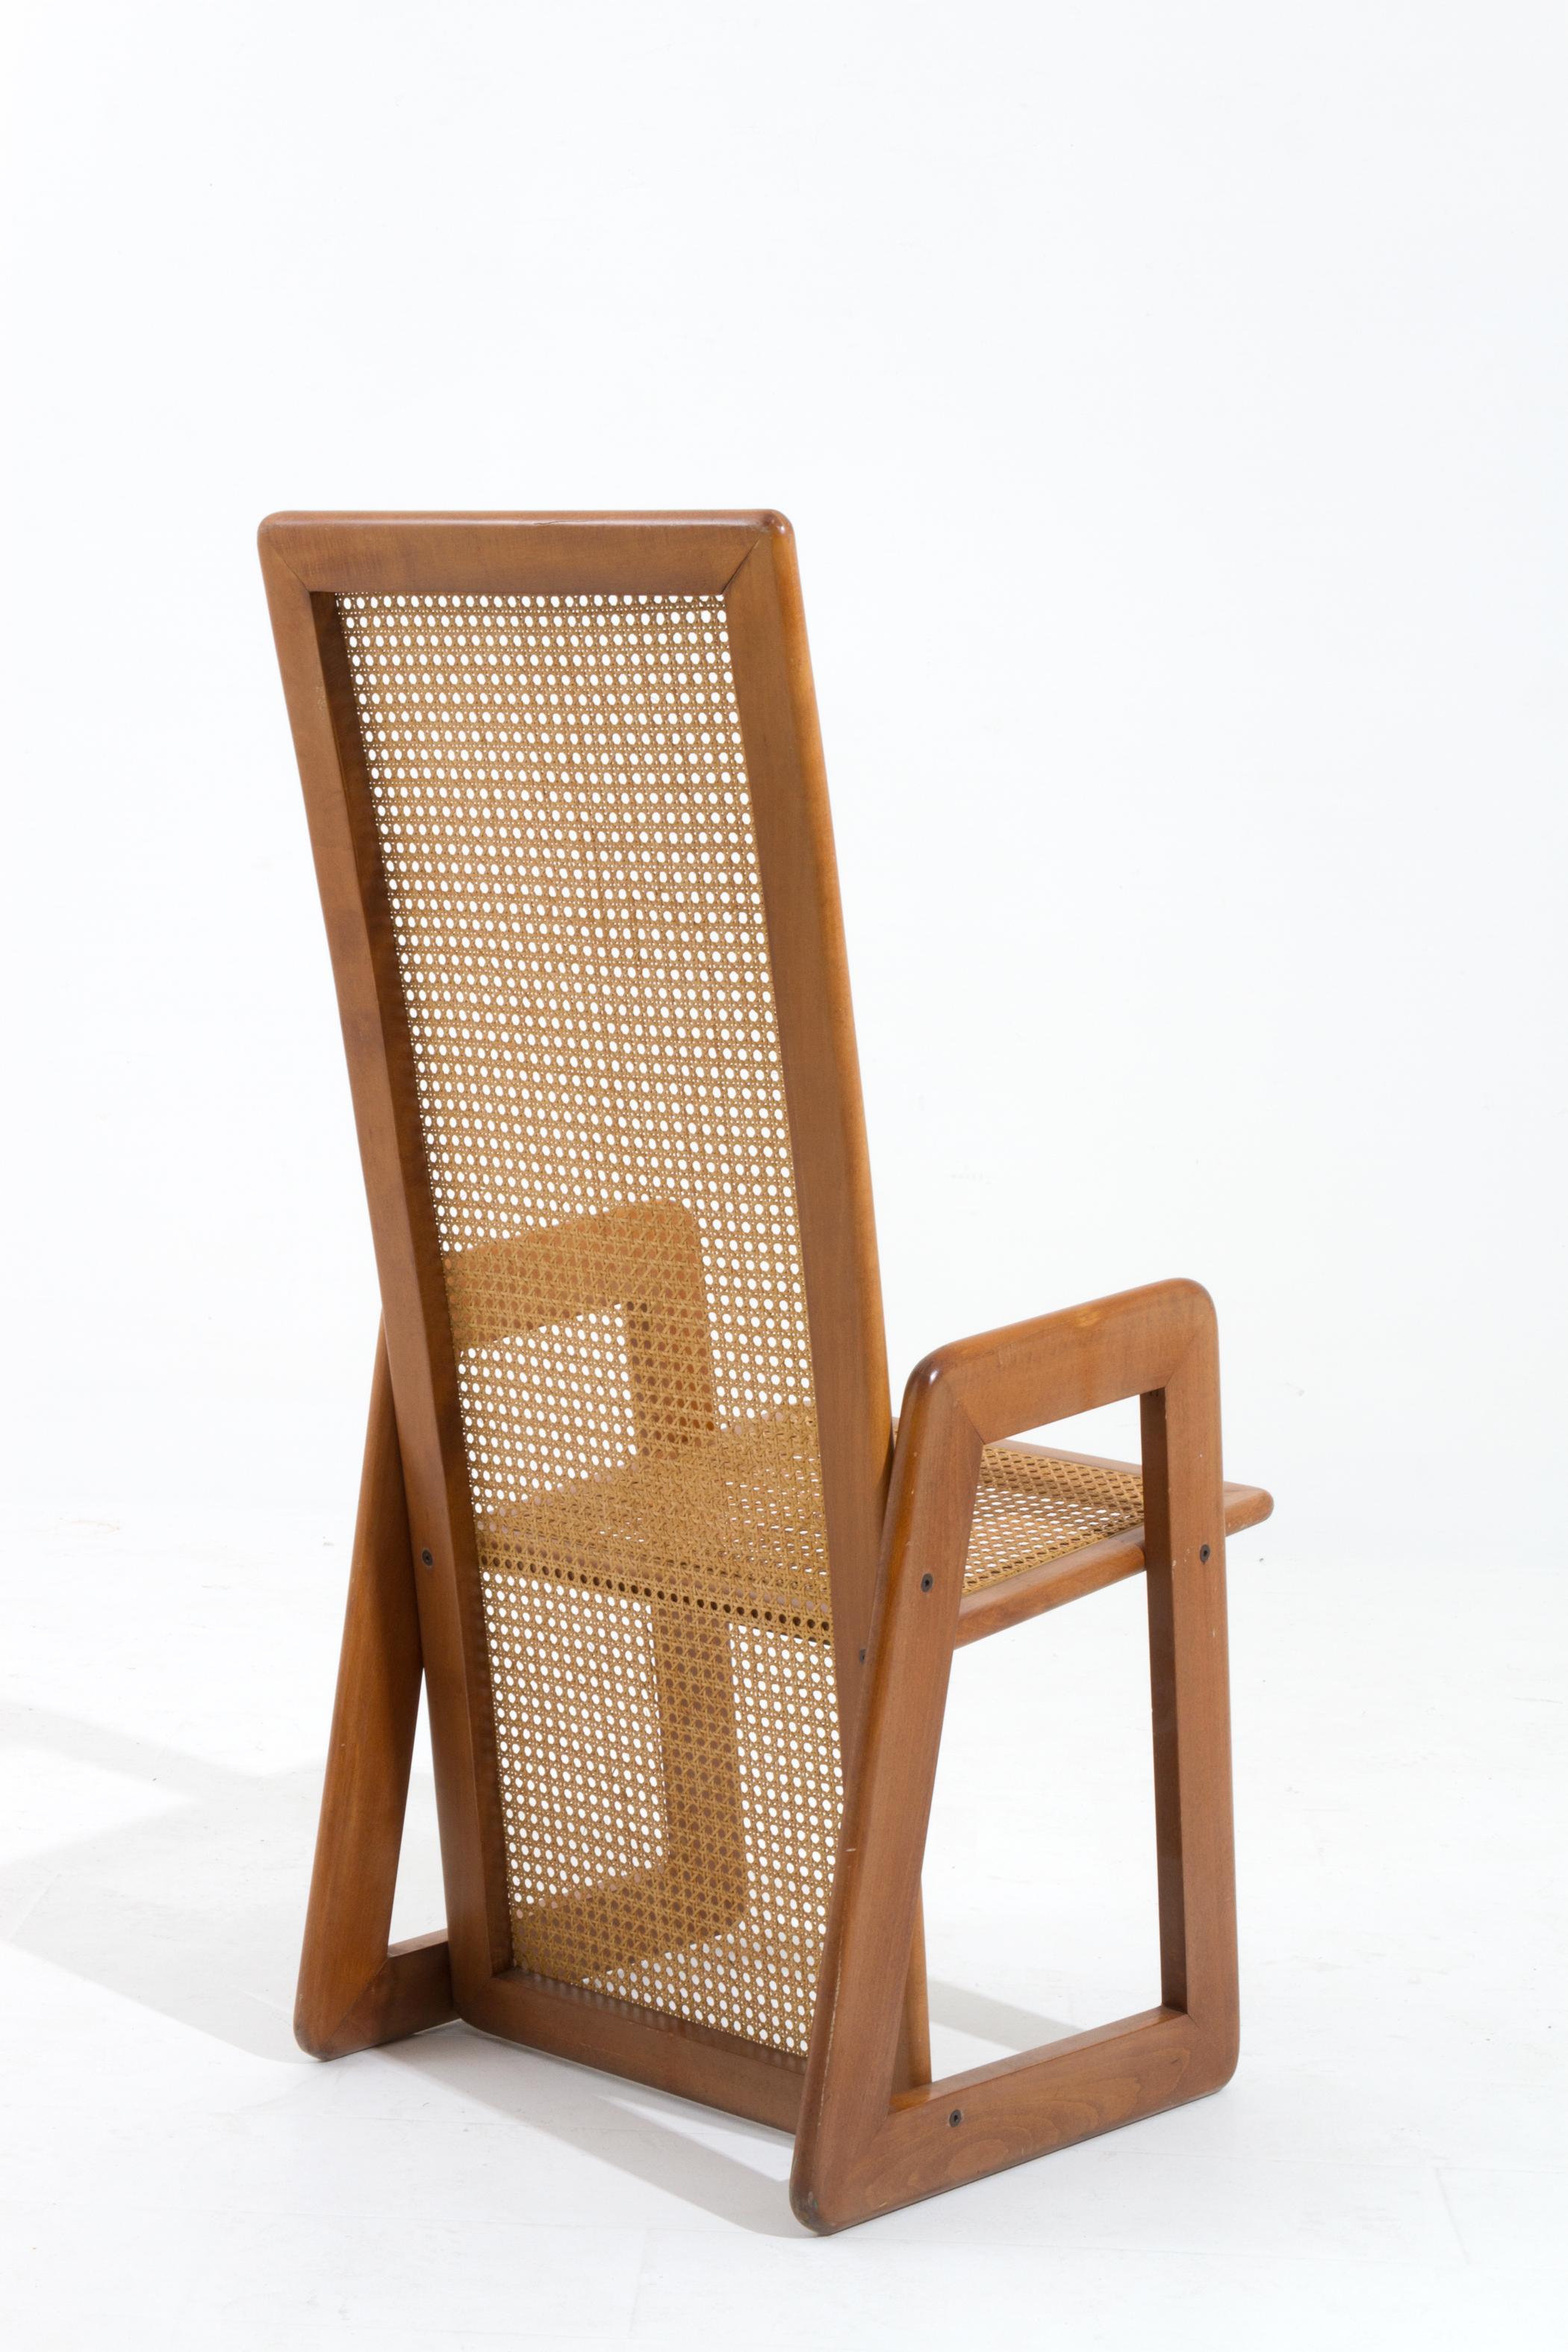 FABIO LENCI (Attr.) (Rome, 1935) 
Six chairs in wood and Vienna straw with high backs. 1970
Measurements : Length. cm. 52 Height cm. 155 Depth cm. 60 approx.
Location Italy, Milan